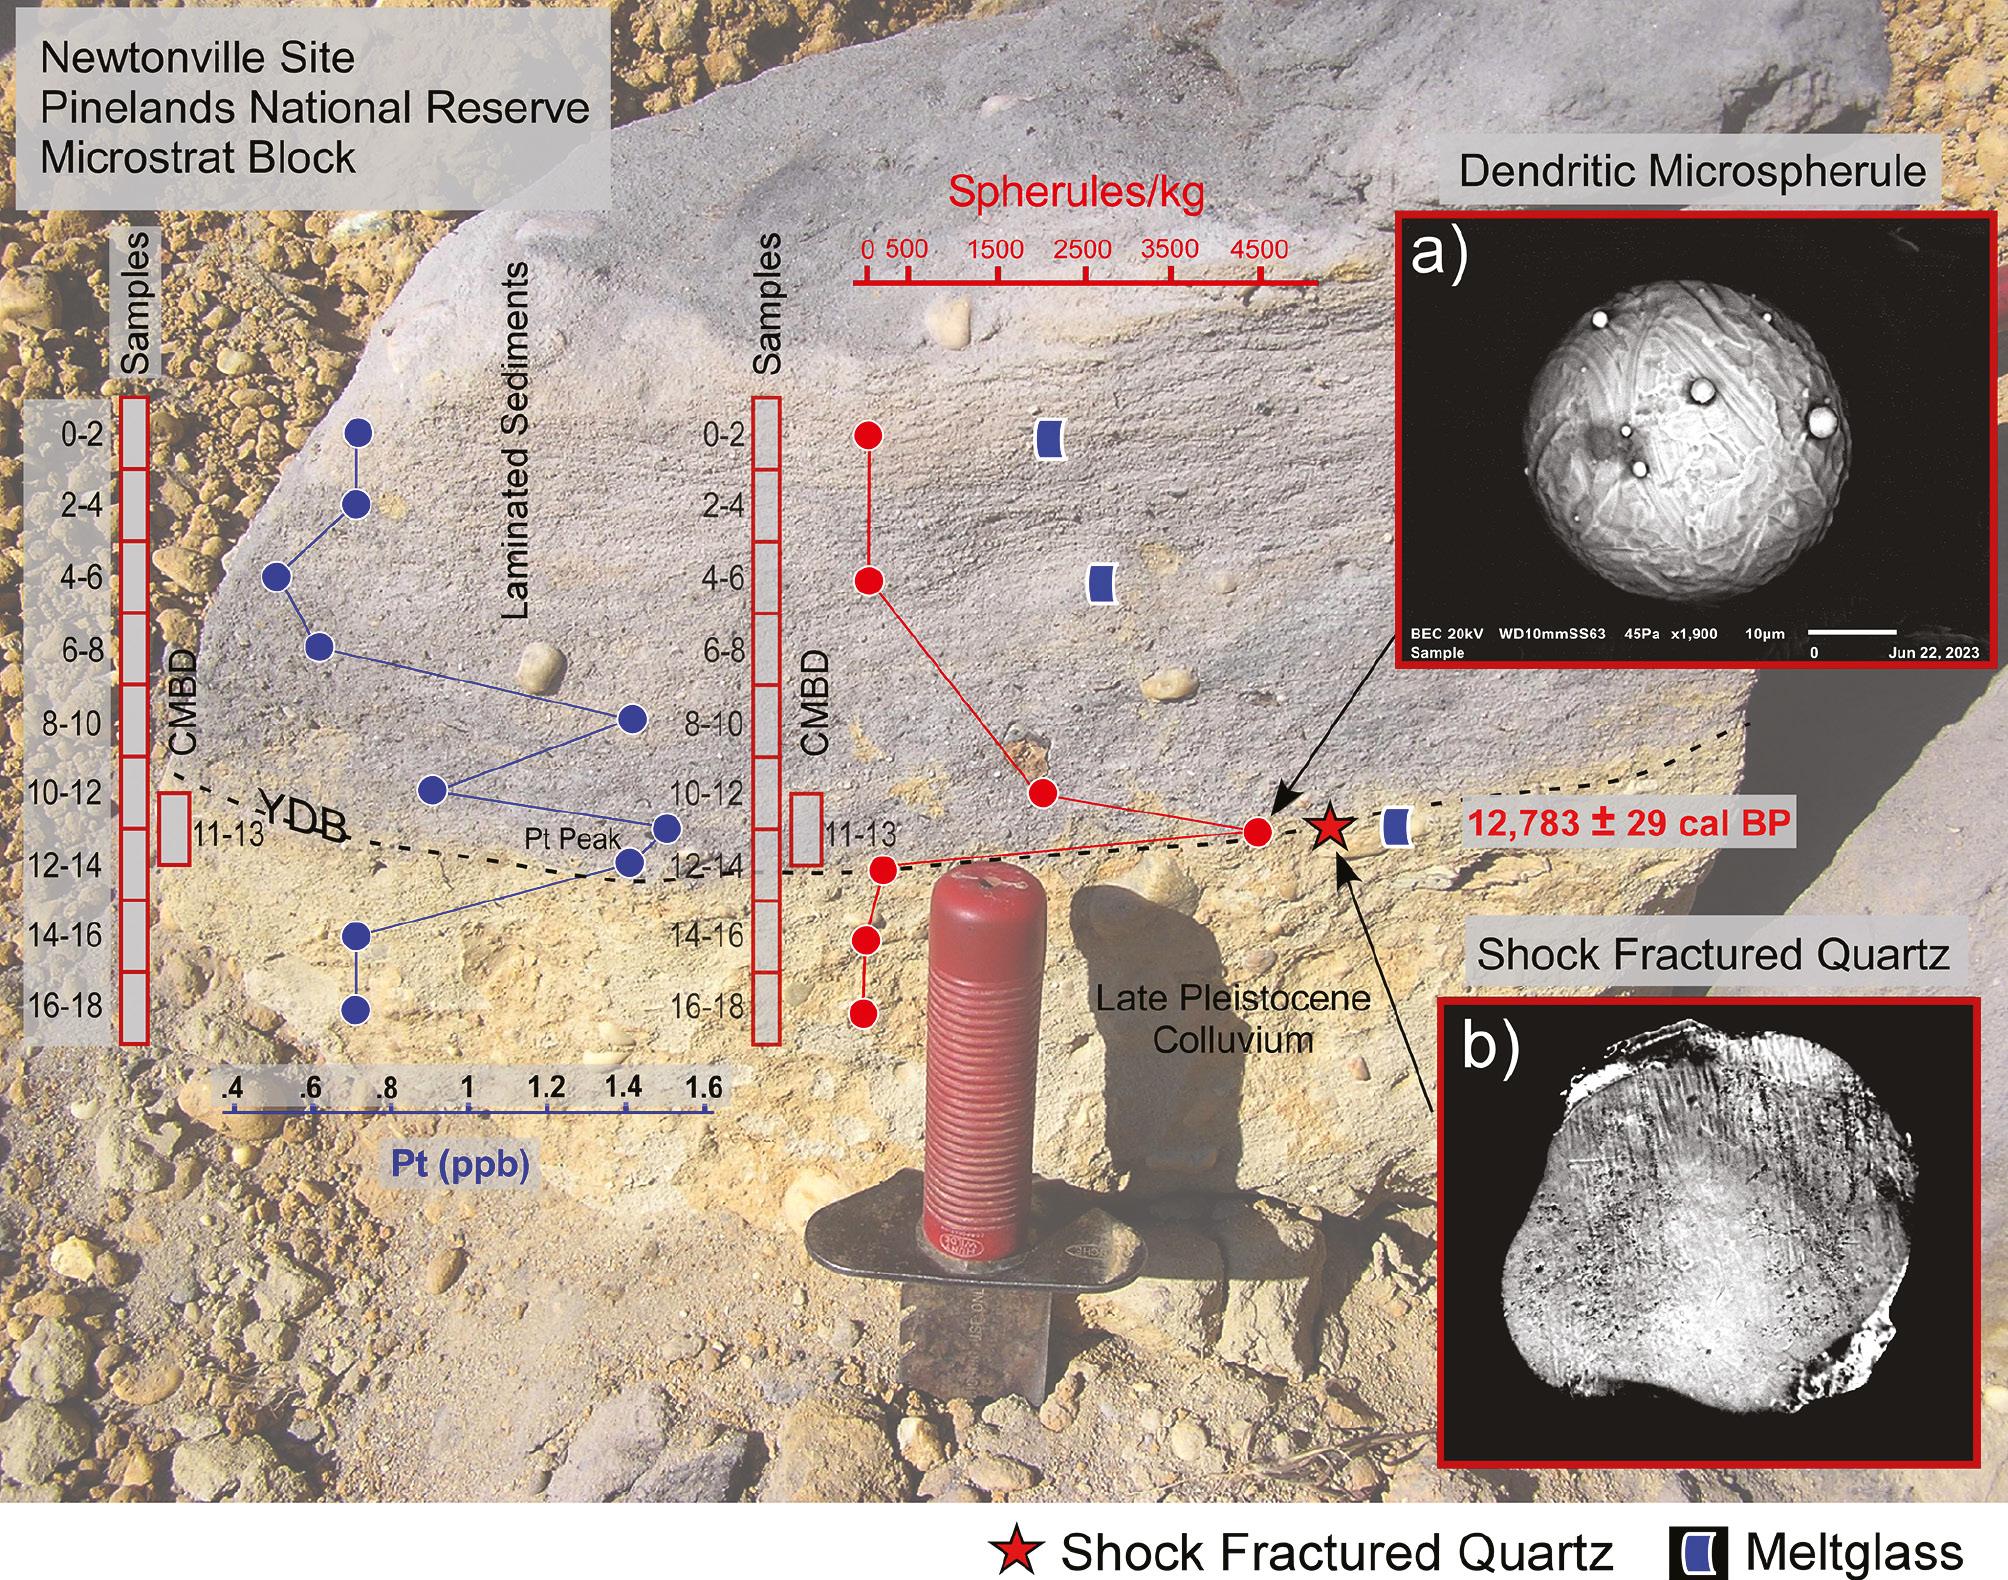 Newtonville microstratigraphic block distribution of cosmic-impact-related proxies. Pt (ppb = ±0.1); YDB-aged microspherules (peak = 4,483/kg); shock-fractured quartz and meltglass in the Newtonville, New Jersey sedimentary section across the onset of the YD. This level marks the boundary (12,783 cal BP) between late Pleistocene colluvium (brown) and the YD gray sediments in the microstratigraphic block sampled at 2-cm intervals. The stratigraphic level of shock-fractured quartz is from sample COA-1 at the base of the gray sediment layer (click on Supplementary Information Figure 1), a YDB AMS date (12,783 ± 29 cal BP; 95% range: 12,833–12,738 cal BP on glasslike carbon (GLC) and the level of the microspherule peak. The dendritic microspherule image (a) was produced using SEM, and the shock-fractured quartz grain image (b) is an optical image using transmitted light (click on Supplementary Information Table 1). Meltglass fragments (click on Supplementary Information Figures 21–22), indicated by the symbol, peaked in the YDB layer, with a few above the YDB likely due to redeposition. The background image shows the intact sedimentary block (∼25 × 30 × 20 cm) surrounded by loose sediment from the sandpit profile where it was detached. Since sandpit mining operations scalped the original surface, sample depths are shown as centimeters below datum (cmbd). The base of gray sediment is estimated to have been 30–40 cm below the current surface (cmbs) [94].